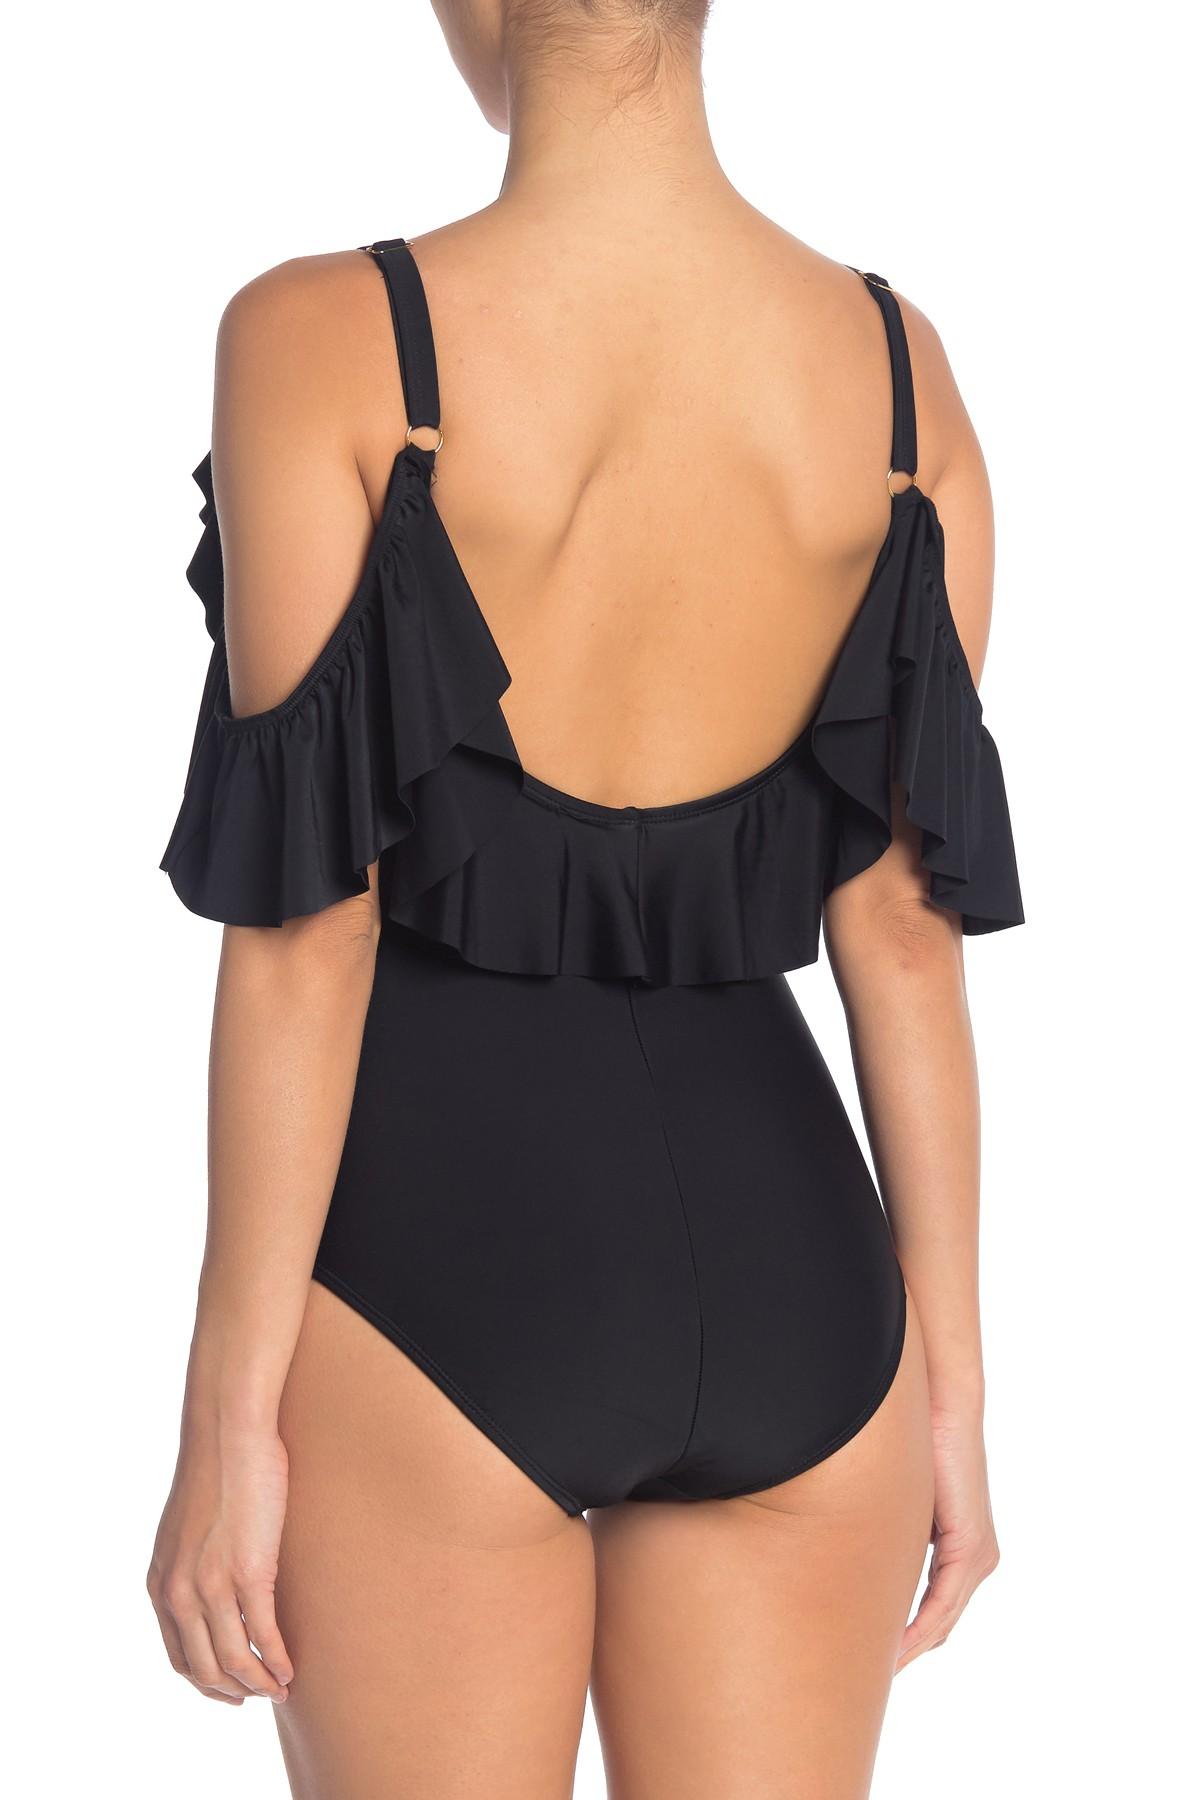 Nicole Miller Ruffled Cold Shoulder One-piece Swimsuit in Black